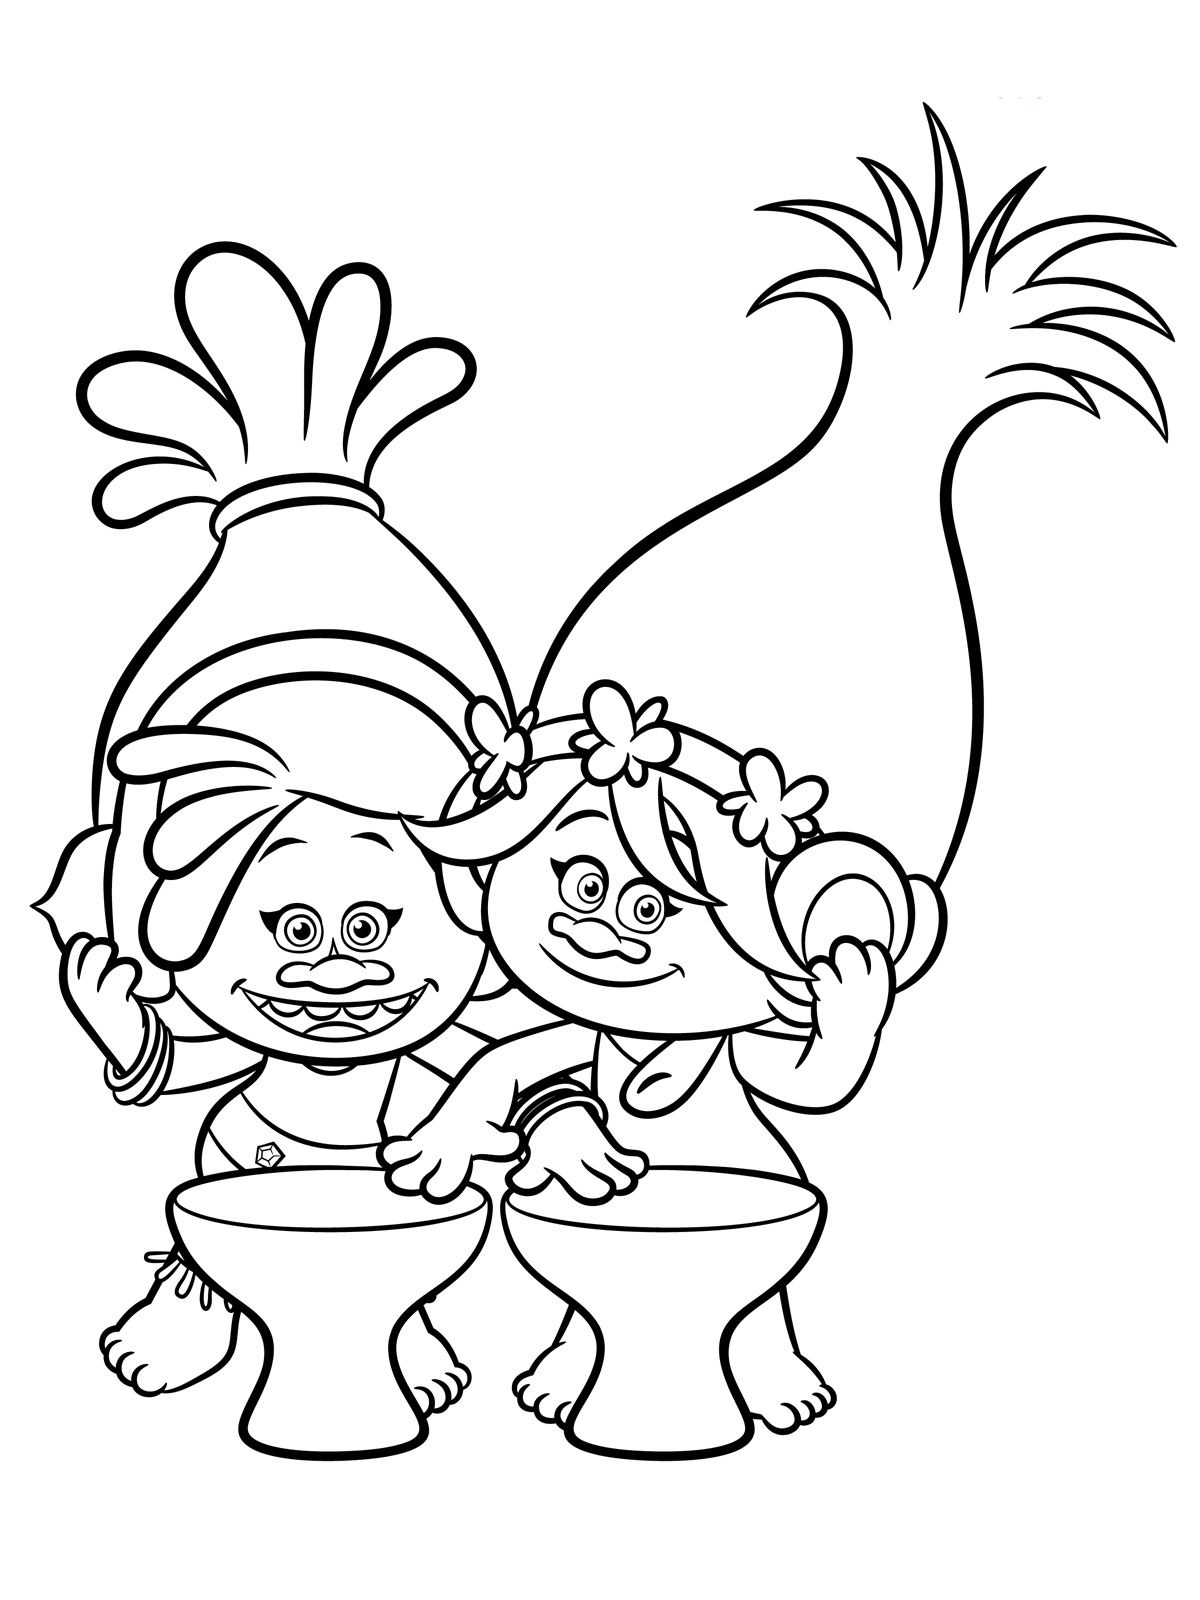 Trolls Coloring Pages To Download And Print For Free | Colouring - Free Printable Troll Coloring Pages